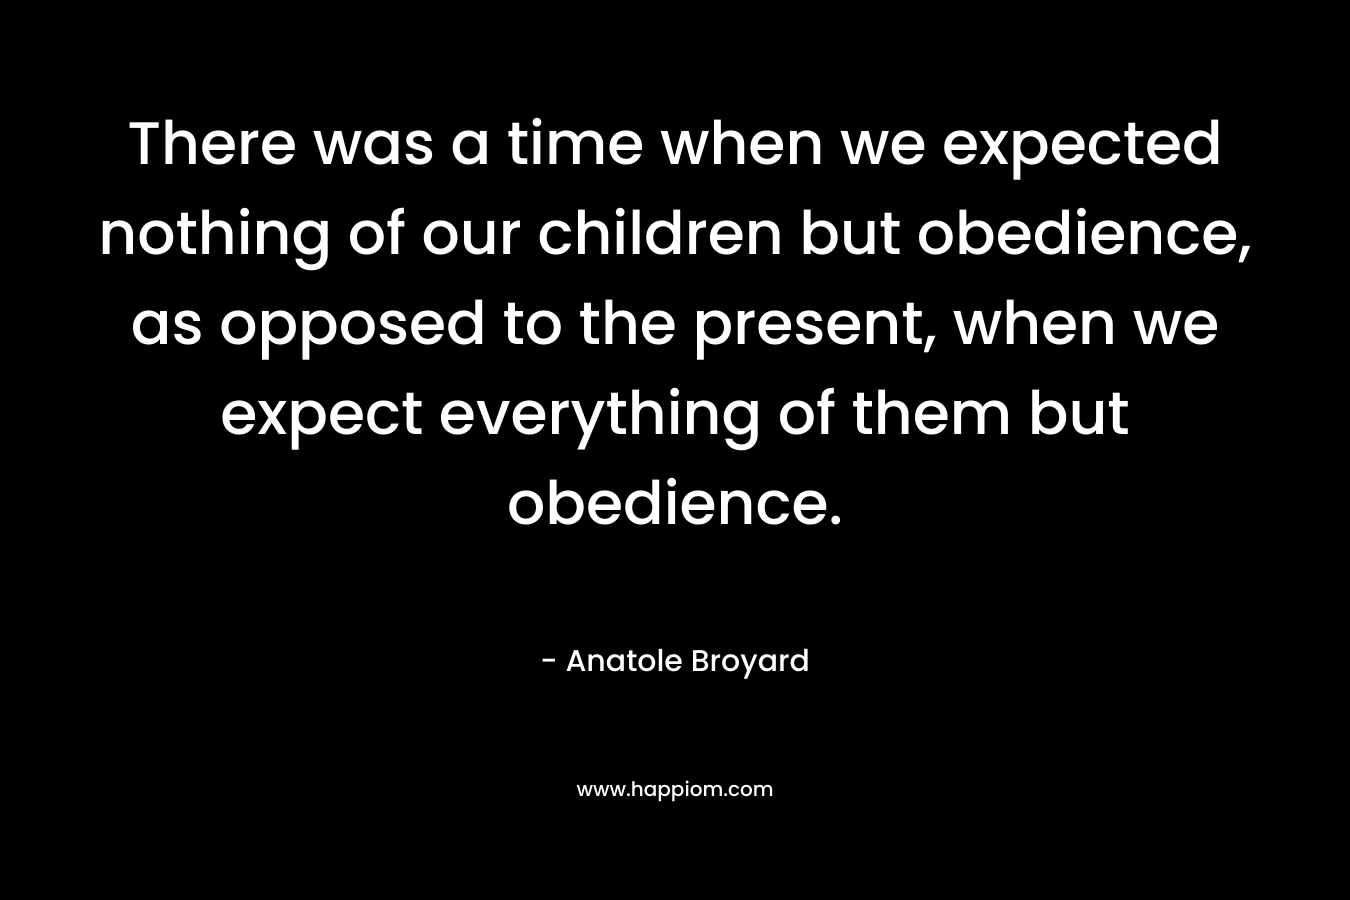 There was a time when we expected nothing of our children but obedience, as opposed to the present, when we expect everything of them but obedience.  – Anatole Broyard